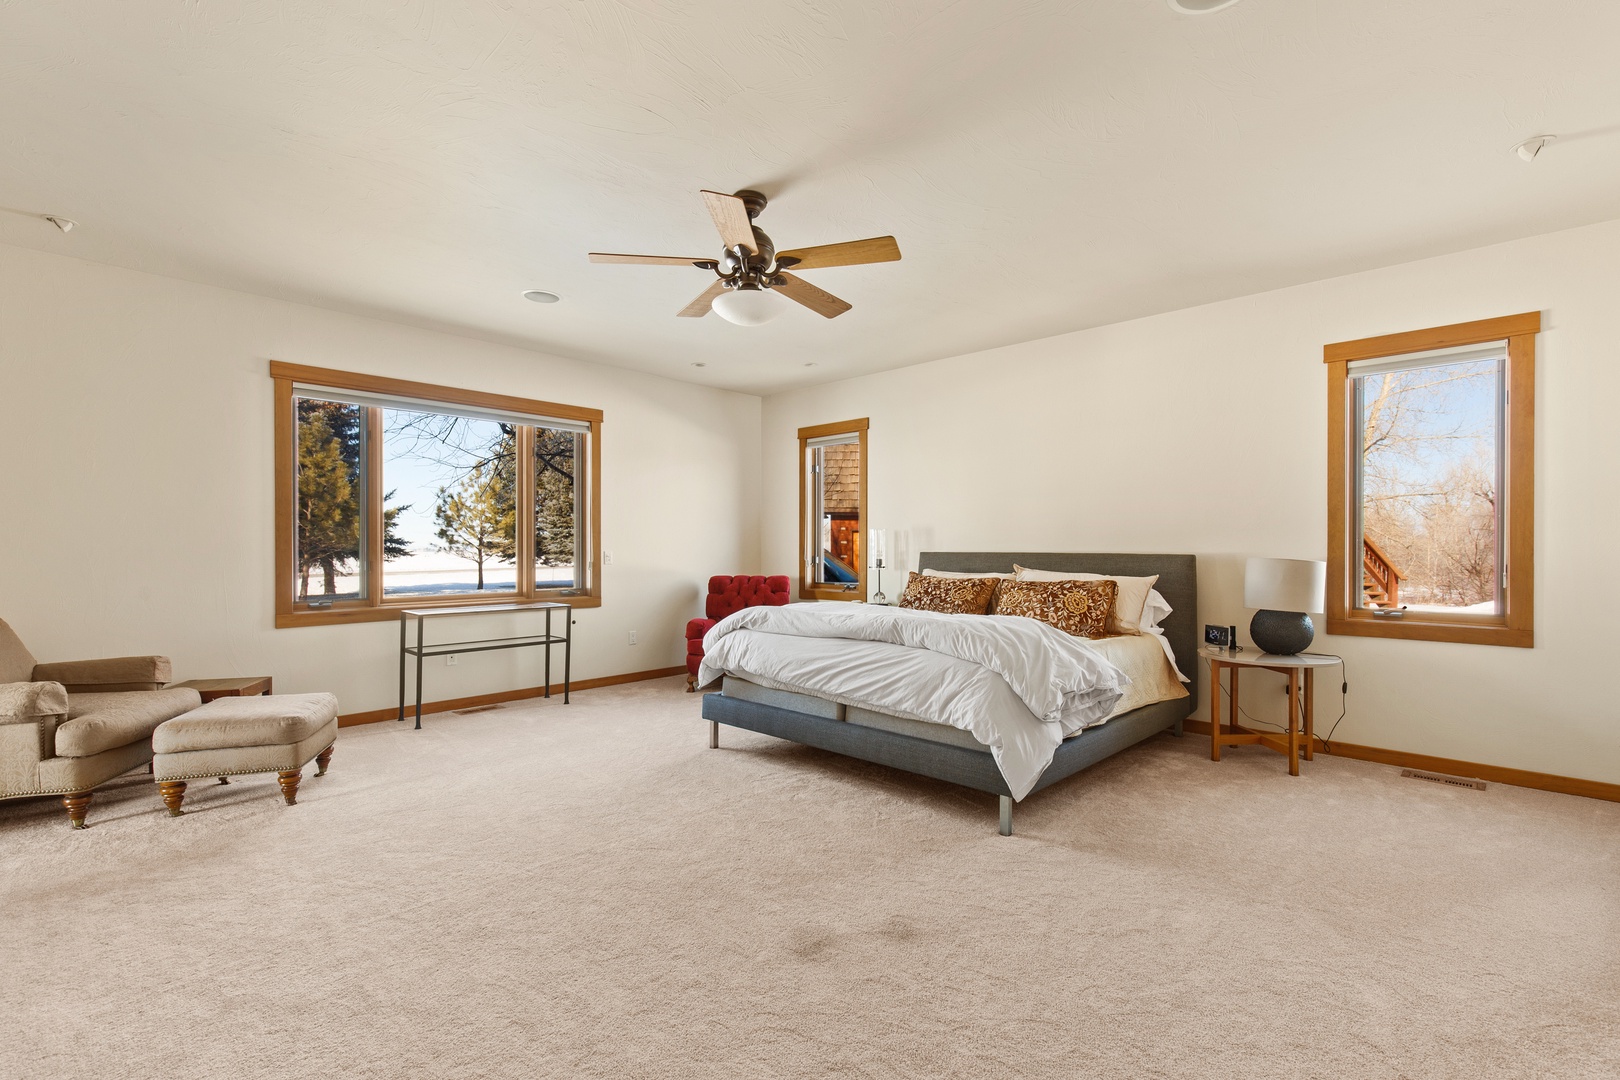 Bozeman Vacation Rentals, The Woodland Oasis - Bedroom #3 with King bed